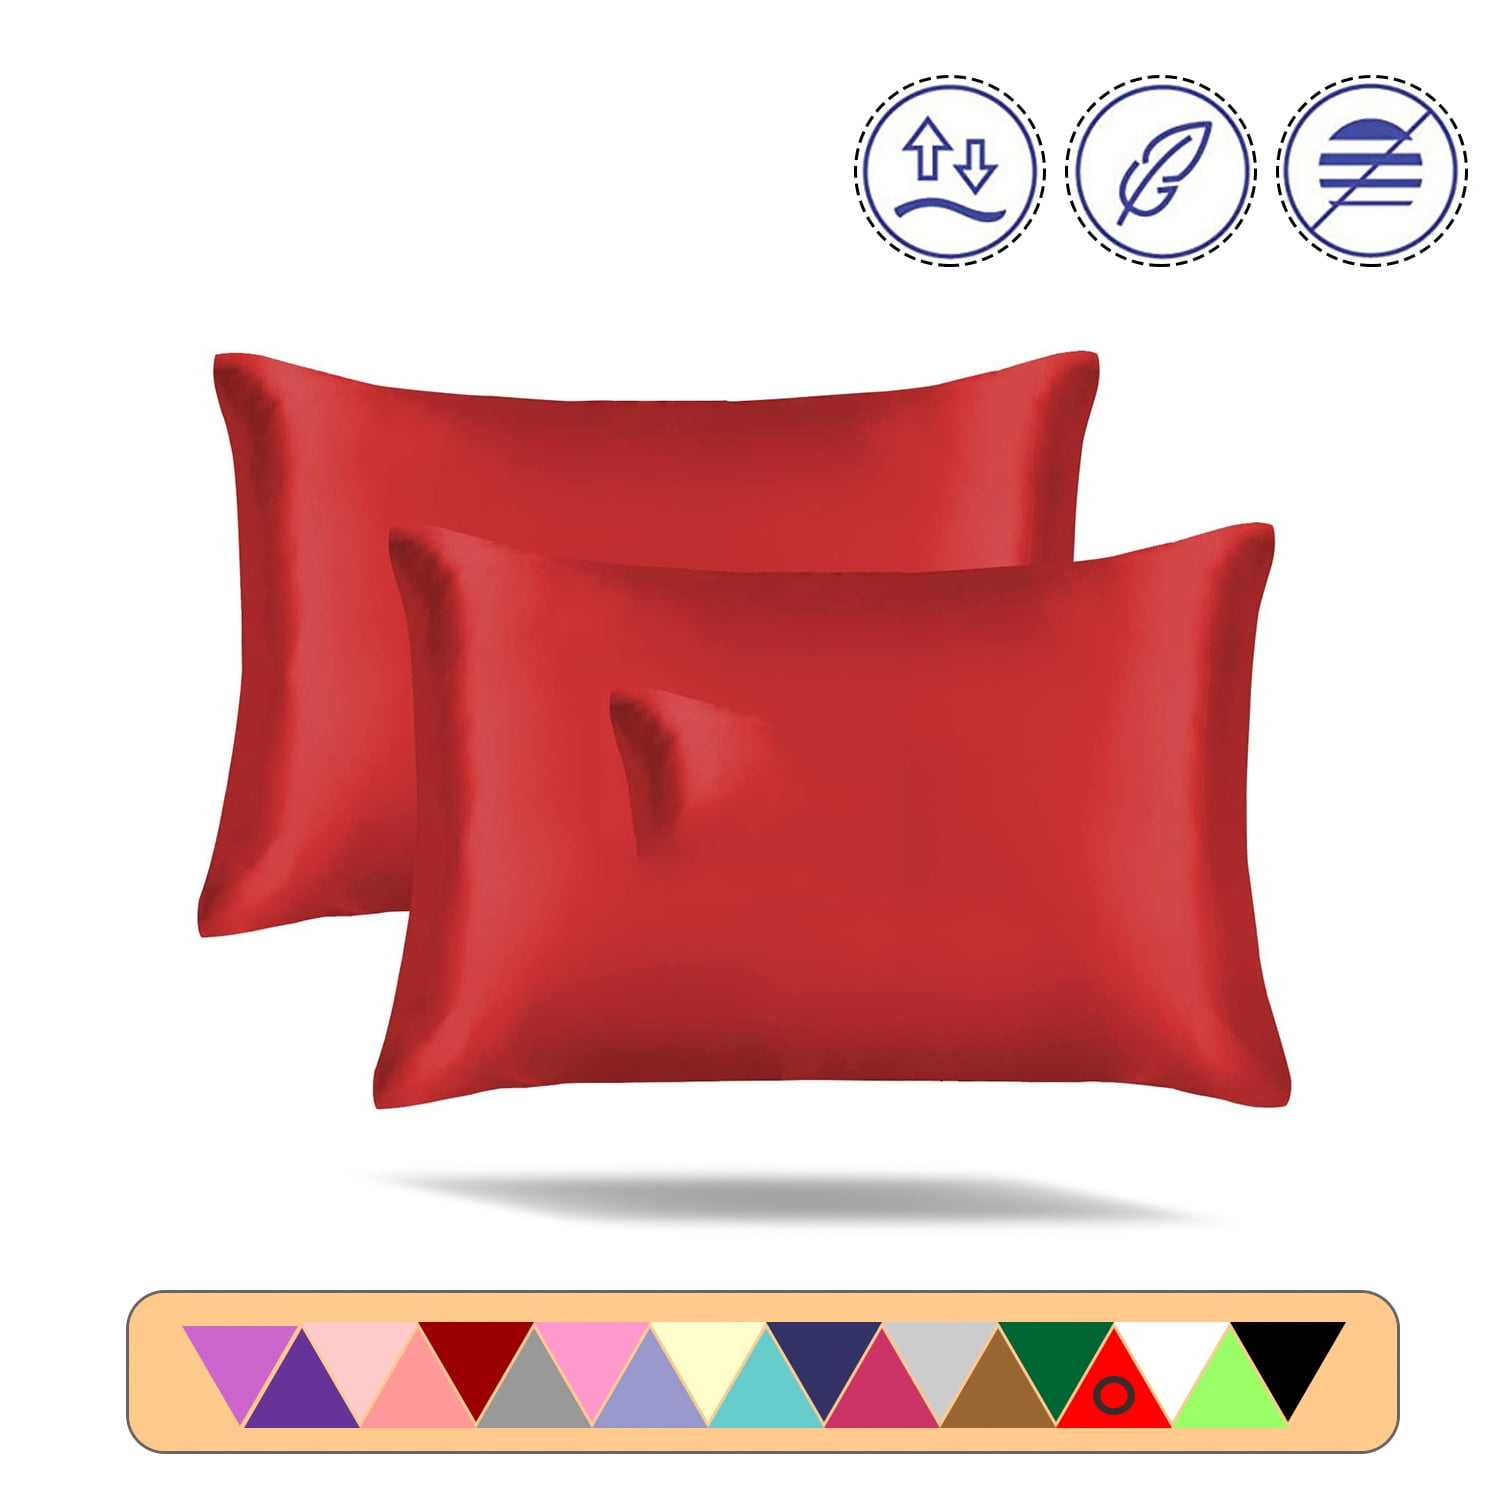 Details about   Silky Pure Satin Pillow Shams Set of 2 Ultra Soft Decorative Pillow Cover/Cases 